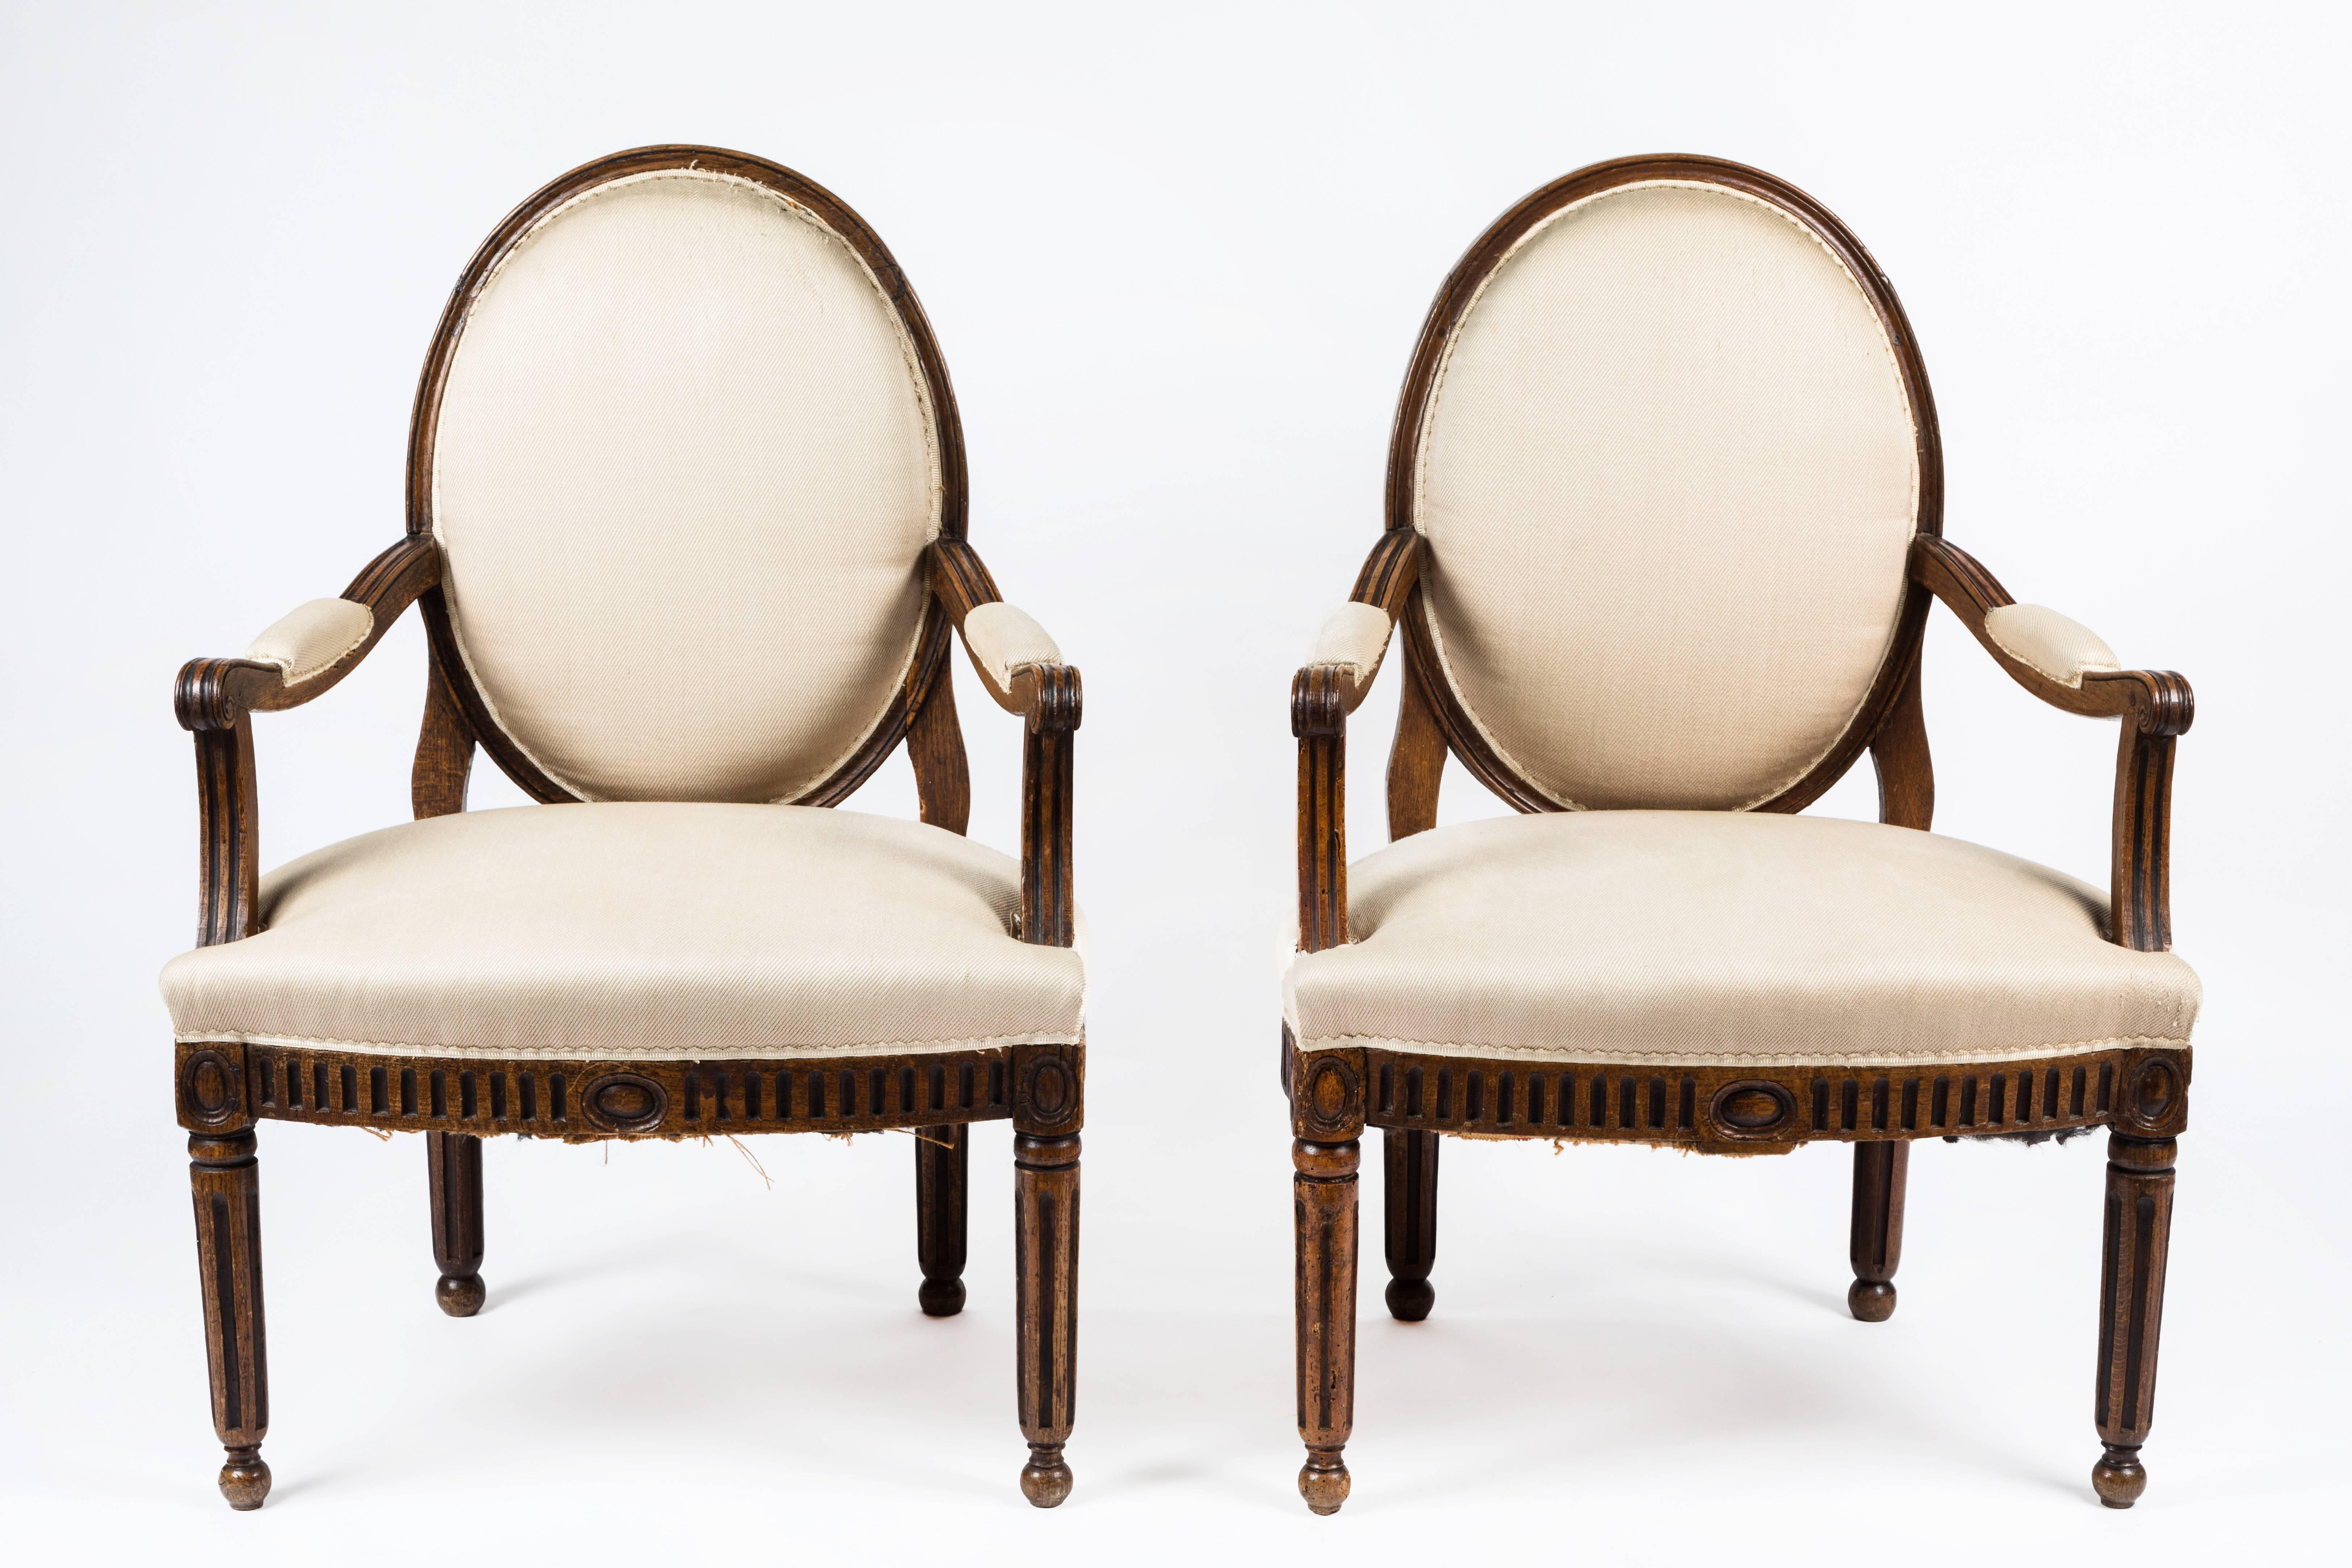 Pair of antique 17th century neoclassical style armchairs with original walnut finish (restored condition). Inside back, seat and arms upholstered with Clarence House woven fabric.